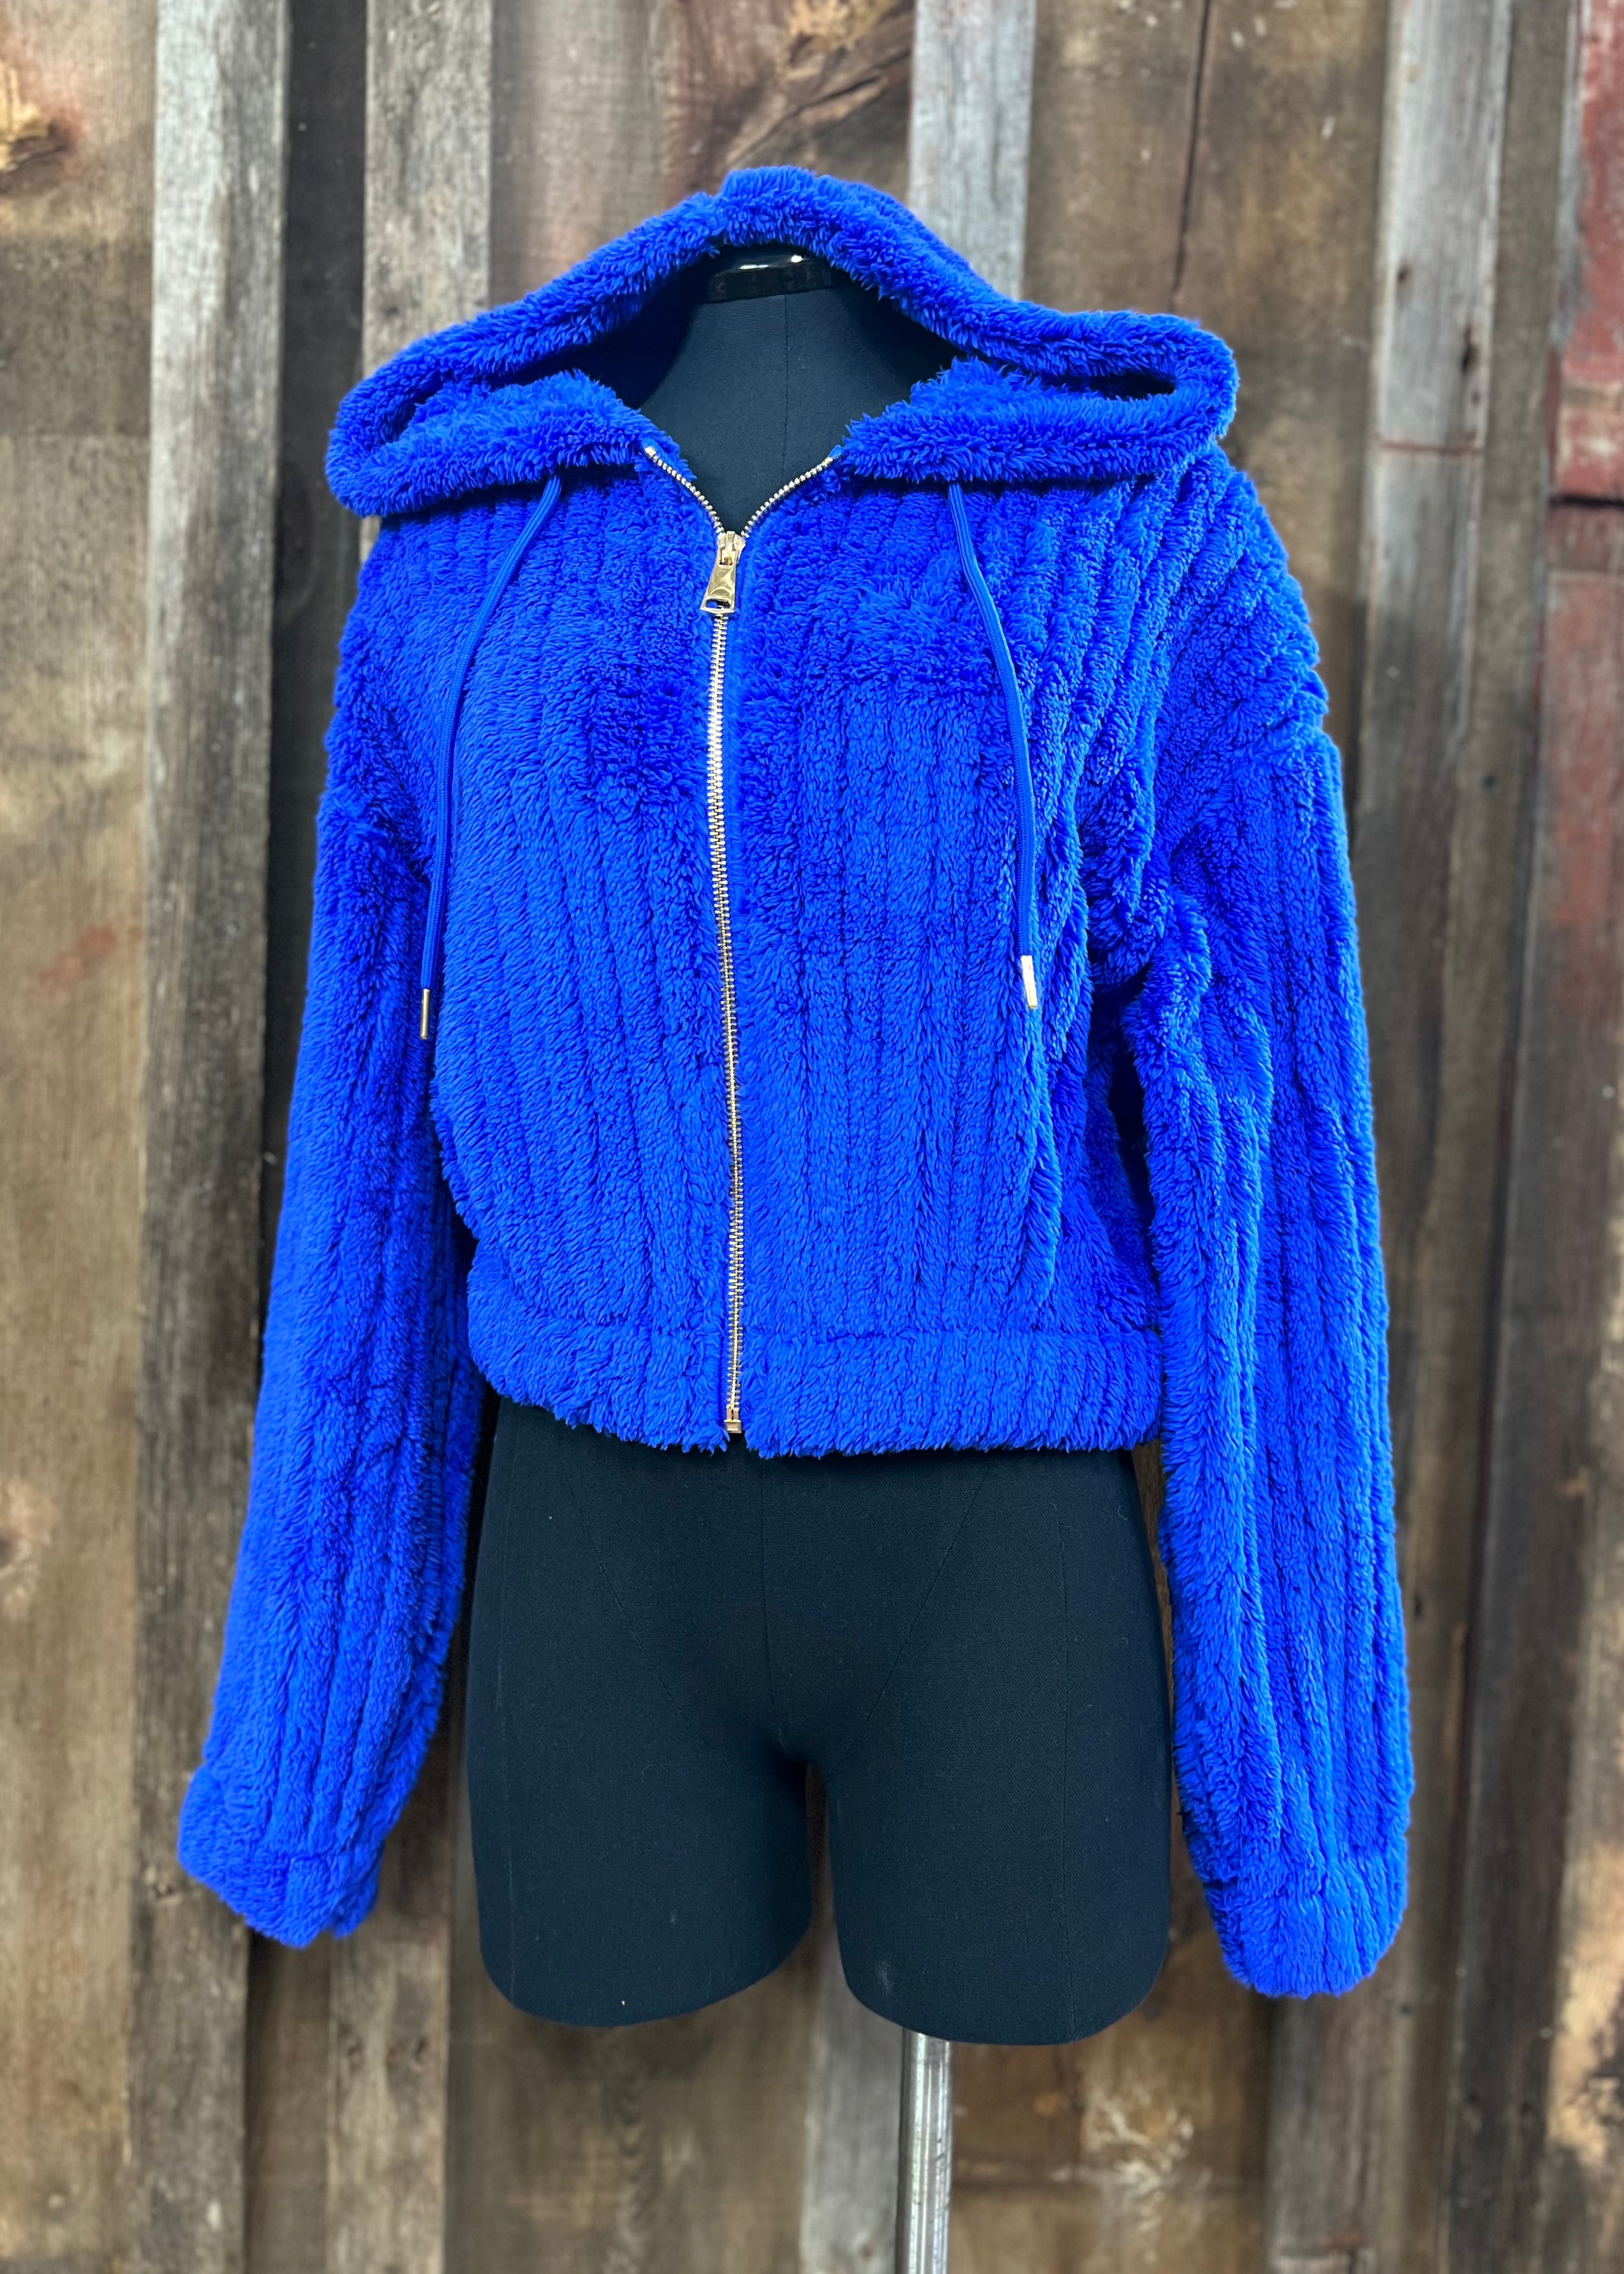 Blue Zip Up Sweater with Hood